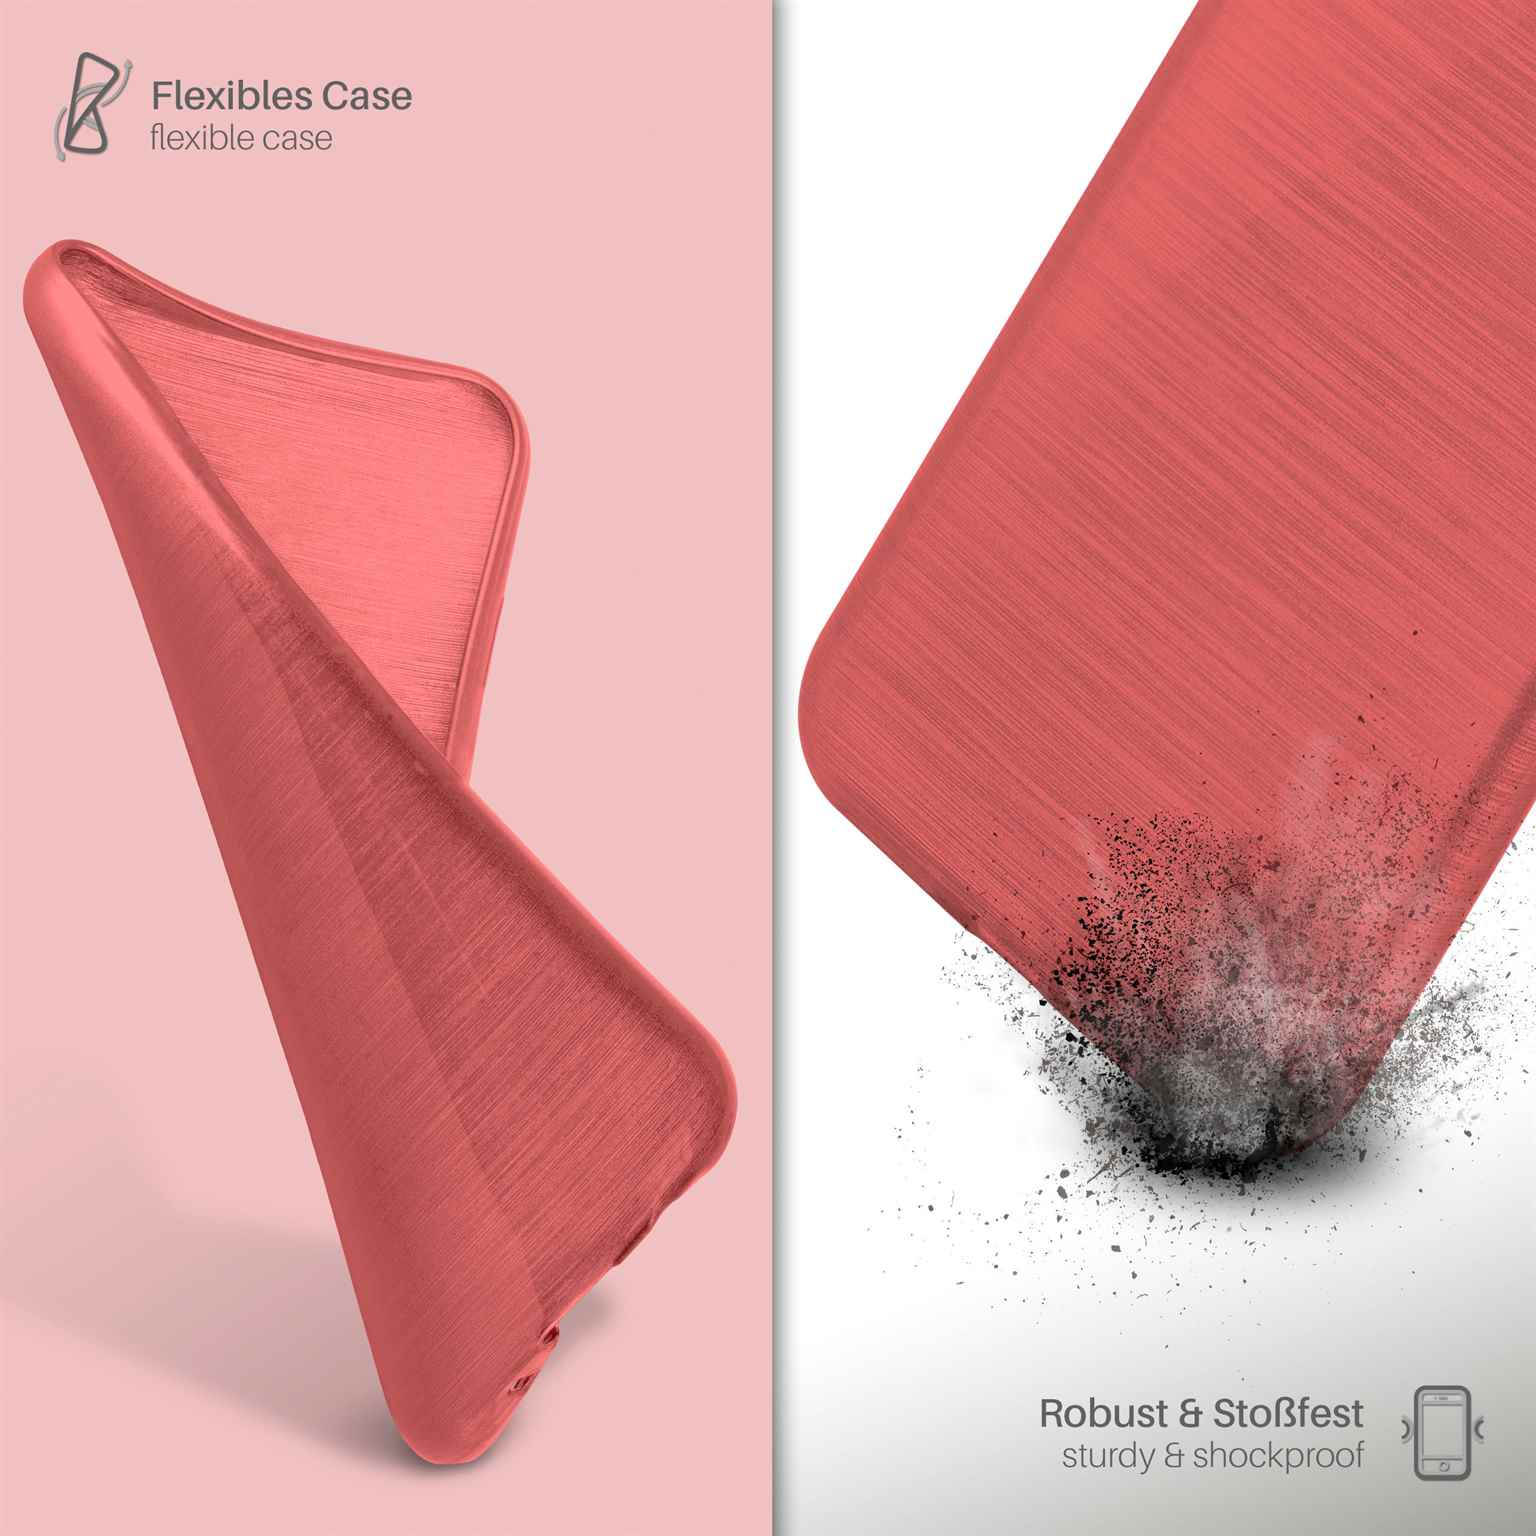 MOEX Brushed Case, Backcover, Samsung, Plus, Galaxy Coral-Red S8